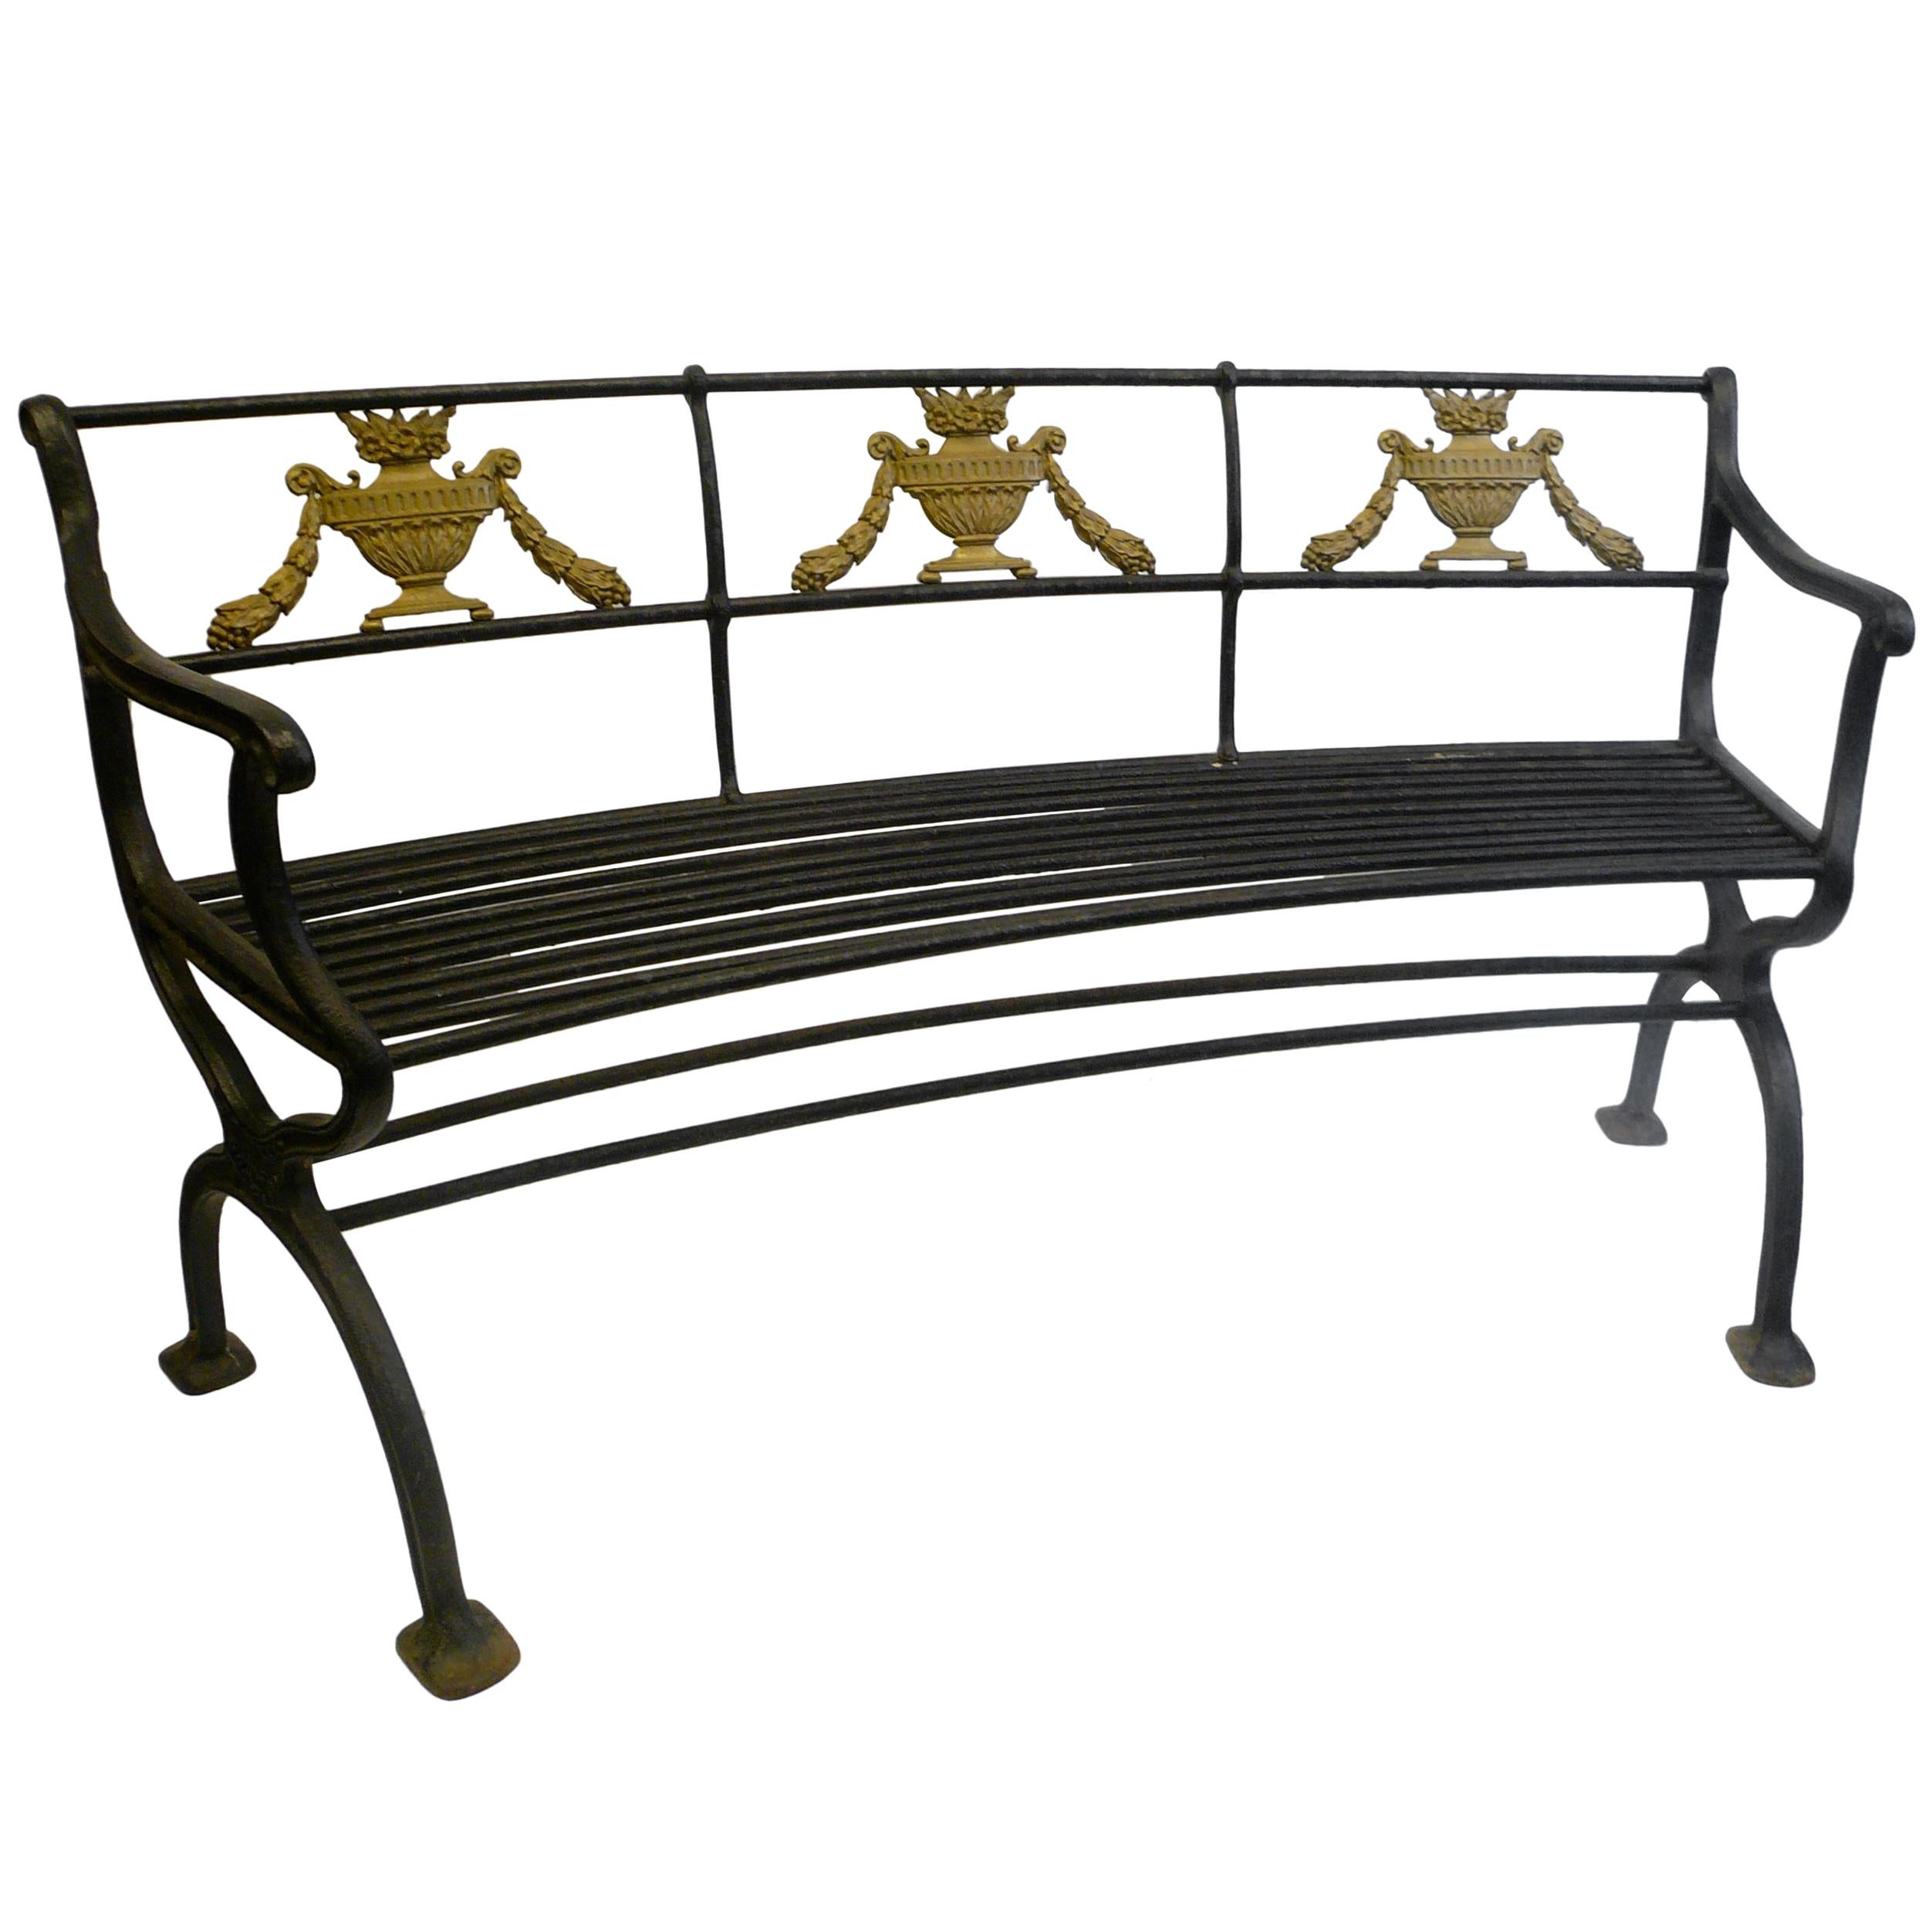 Pair of Classical Style Cast Iron Garden Benches by W. A. Snow, Boston